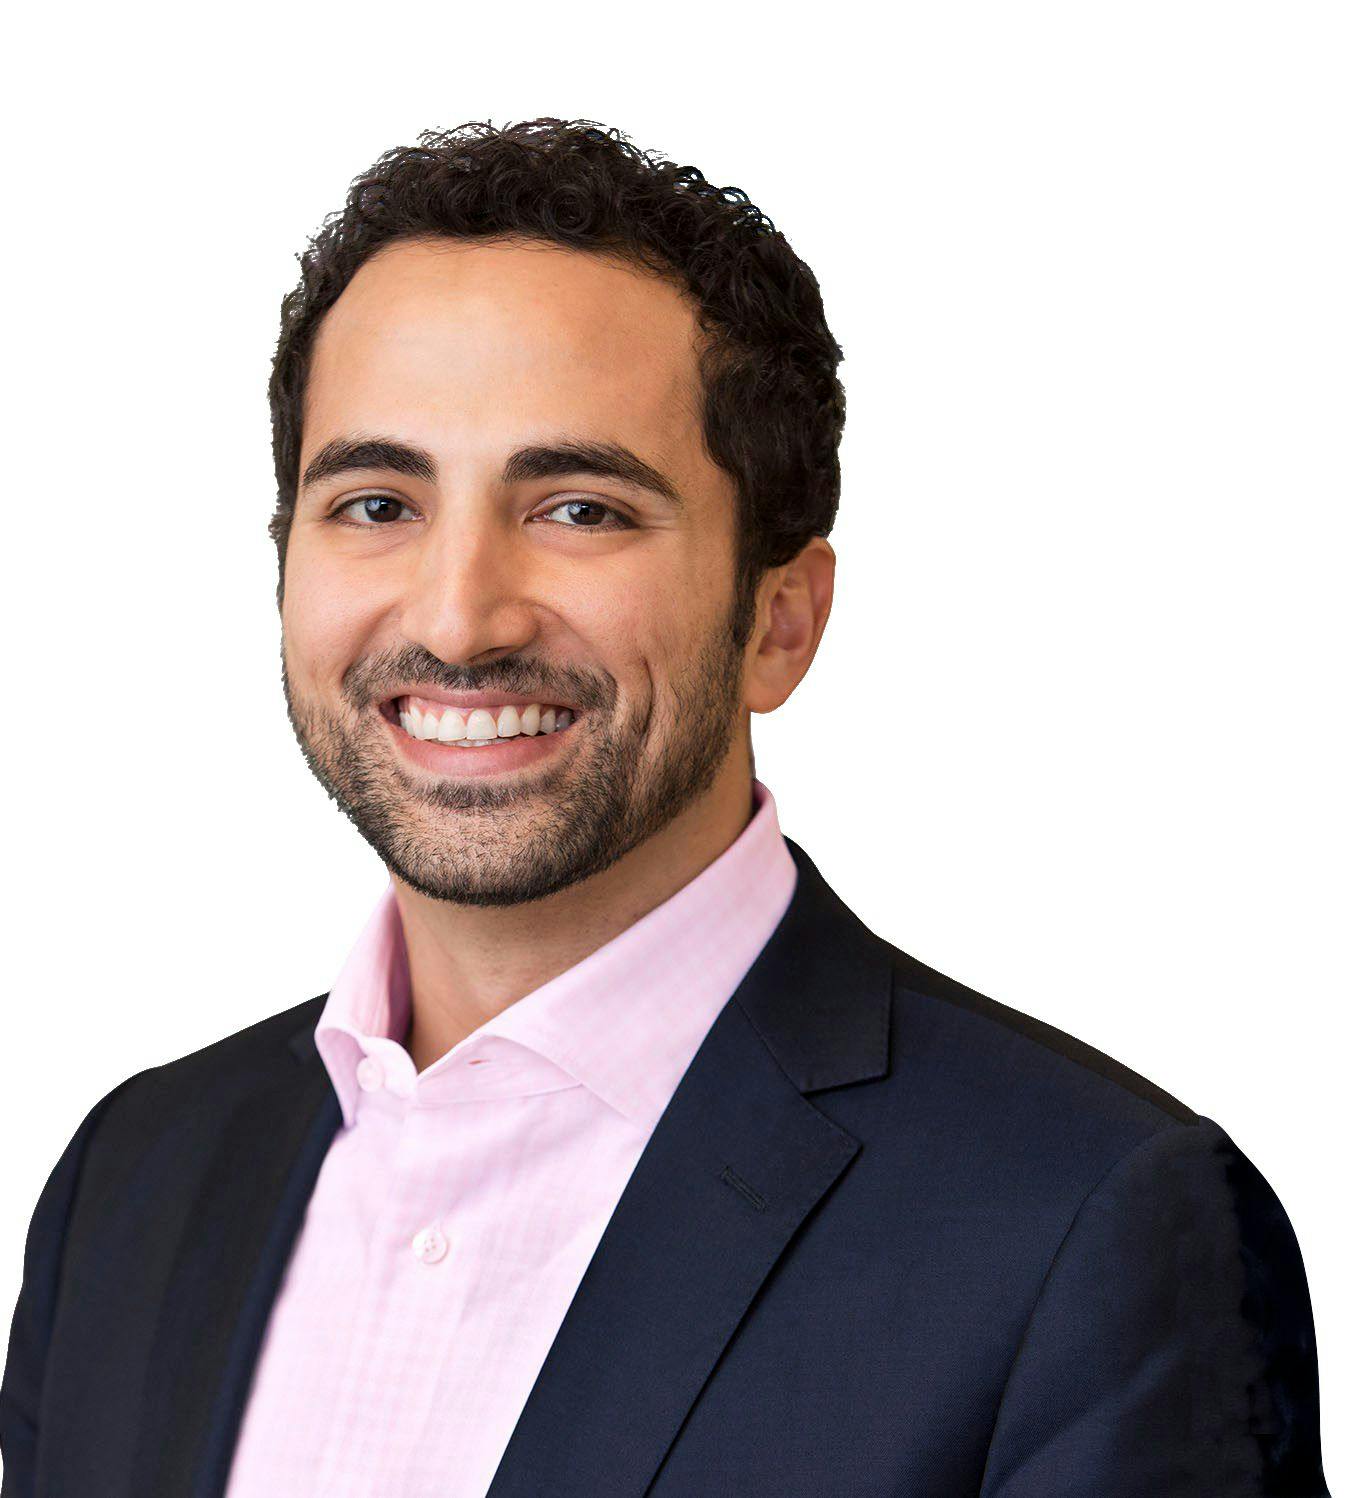 Mostafa Kamal is the new president and CEO of Prime Therapeutics, a pharmacy benefits manager heaquartered in the suburban Twin Cities and owned by 19 Blues plans.